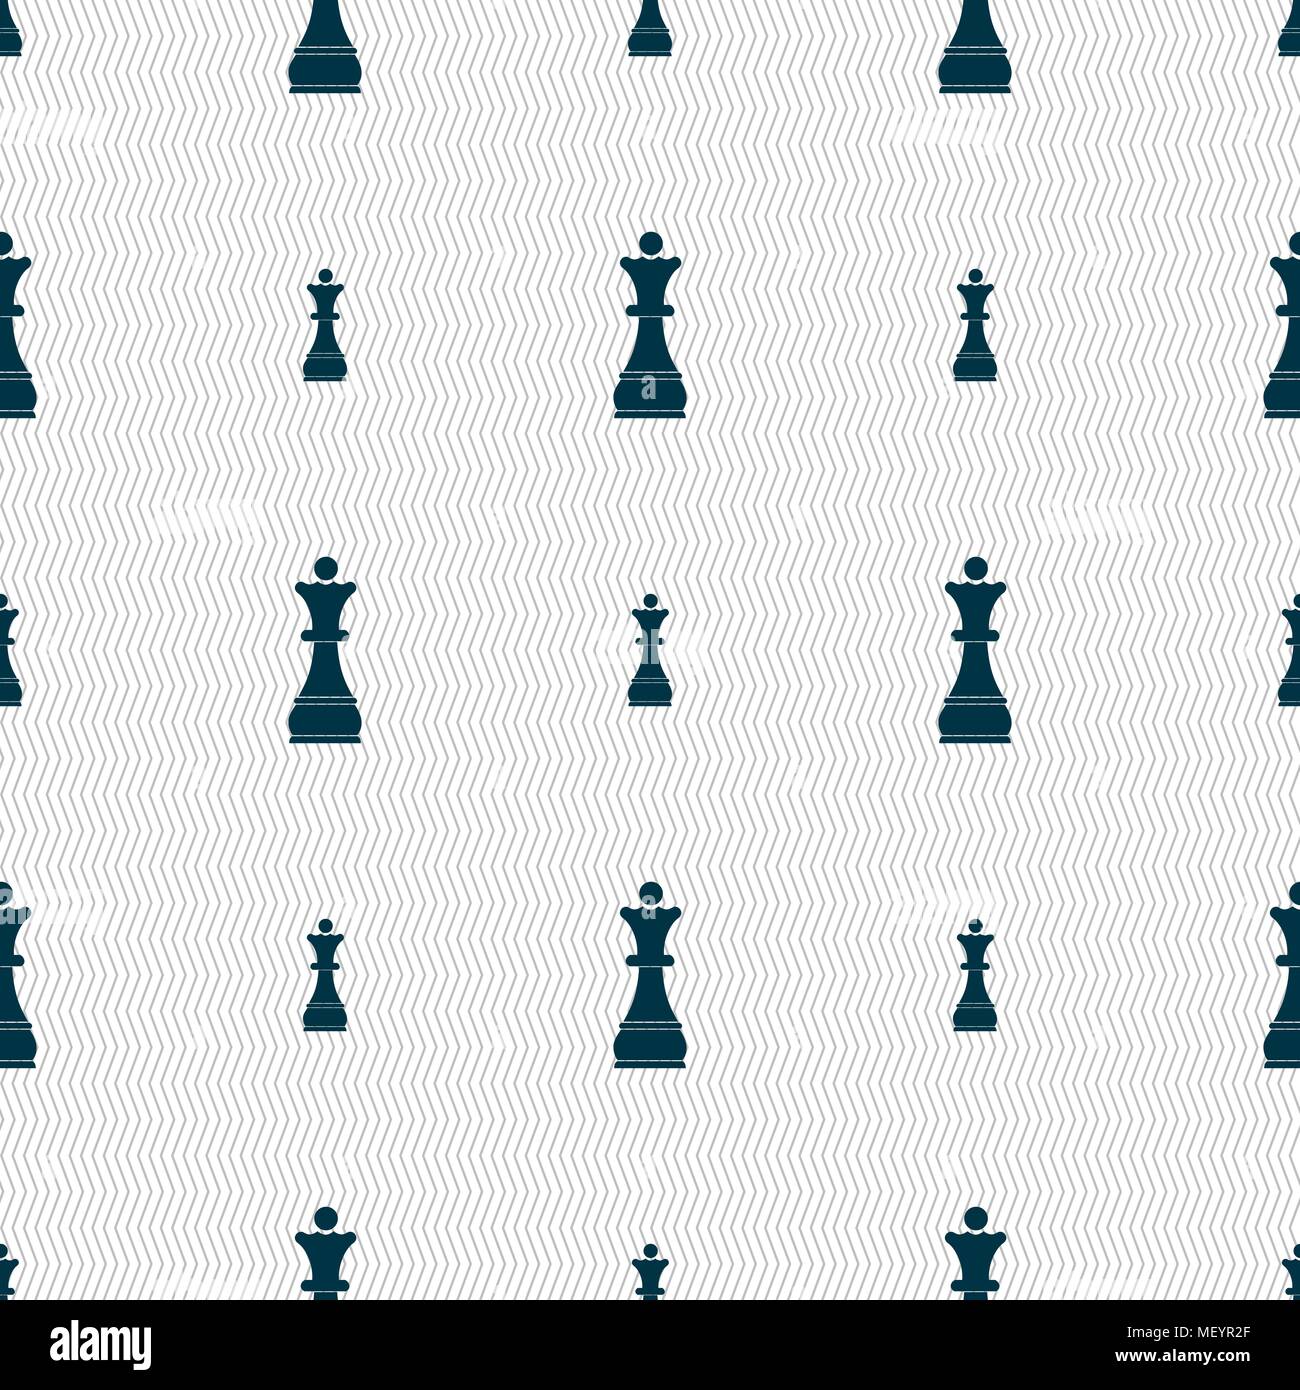 Chess Queen sign. Seamless pattern with geometric texture. Vector illustration Stock Vector